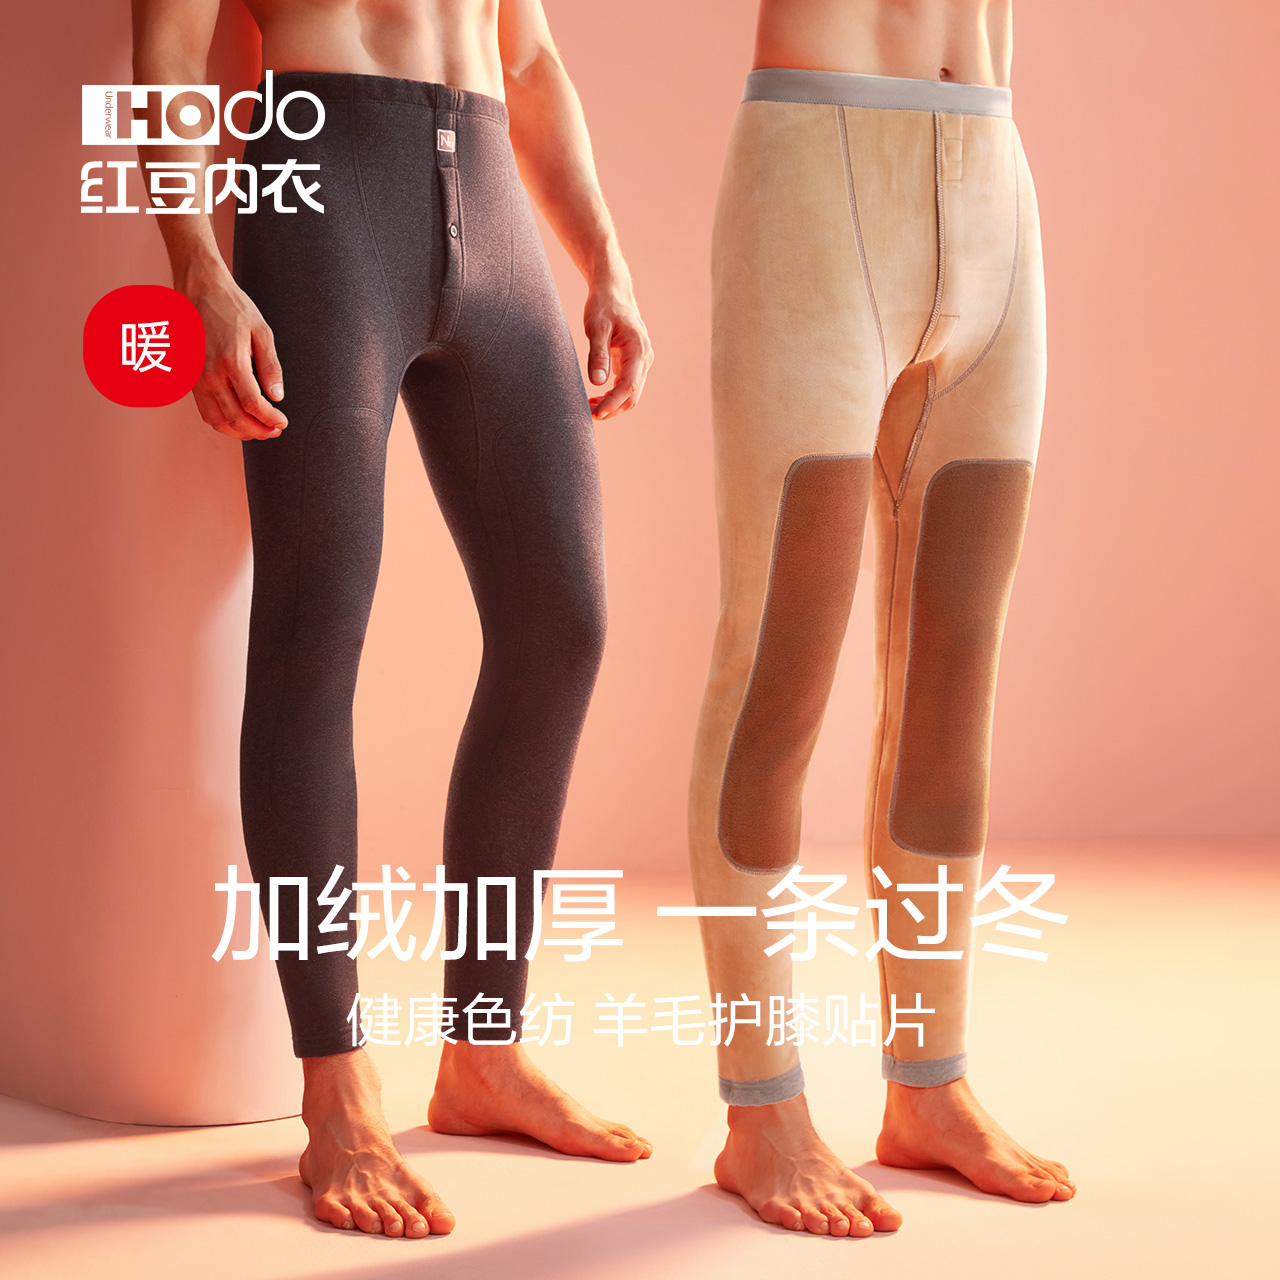 Red Bean Men Warm Pants Thickened plus suede with wool Kneecap Winter Northeast Middle Aged Cotton Pants Line Pants Autumn Pants-Taobao